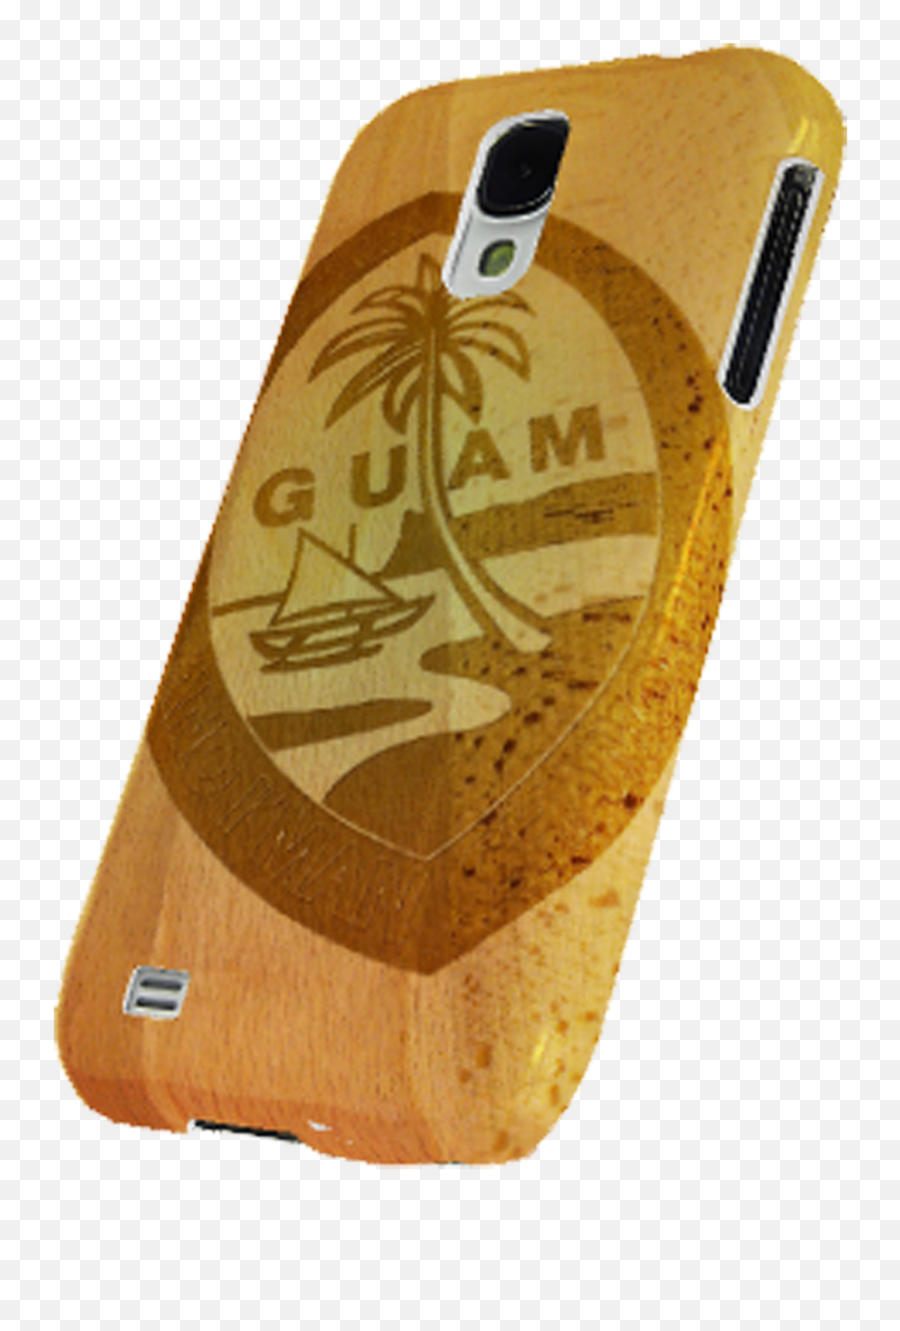 Wood Etched Guam Seal Motif On Samsung Phone Models - Mobile Phone Case Emoji,How To Add Emojis On Samsung Galaxy S4